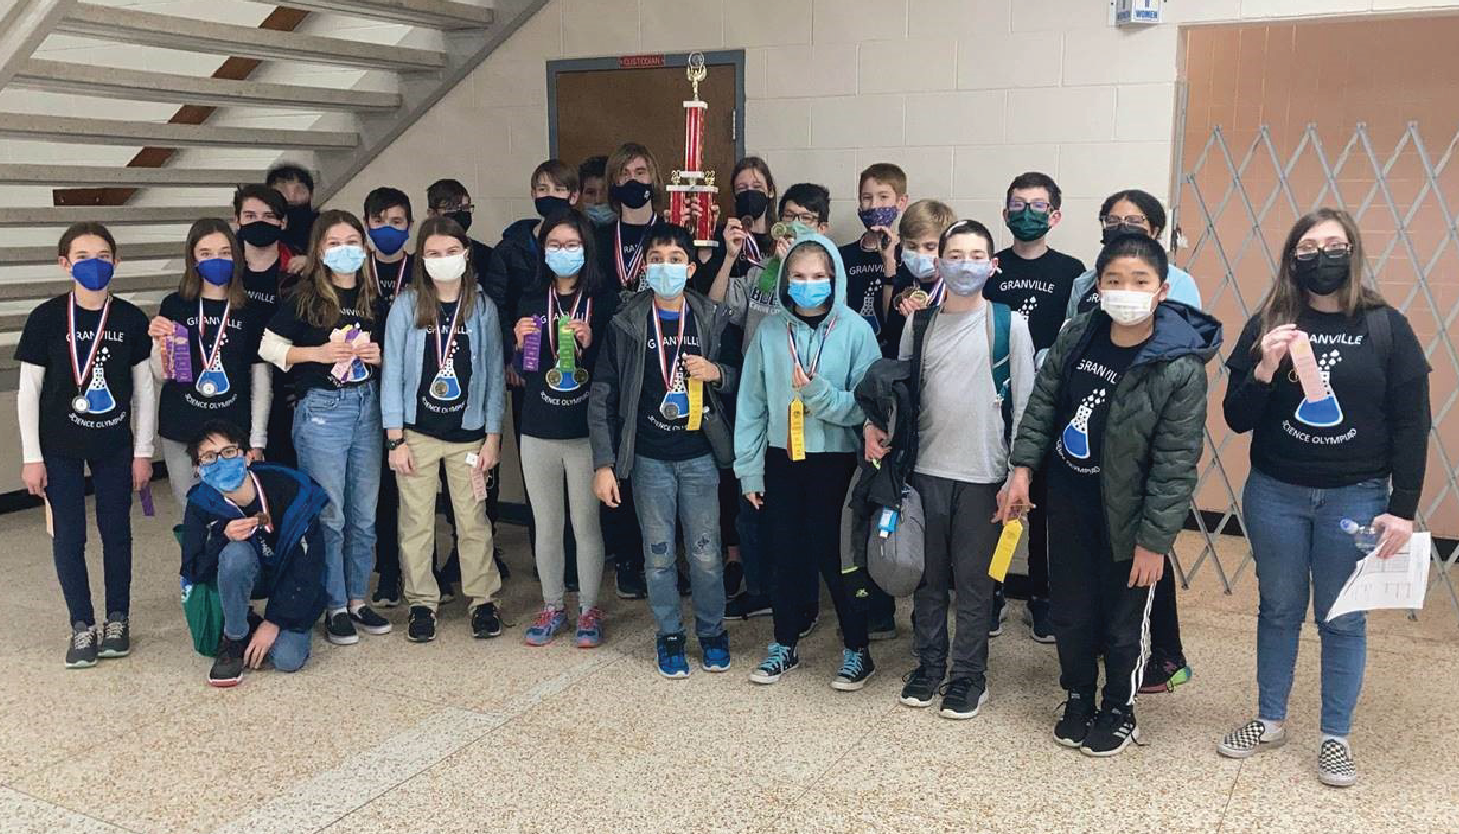 The Granville Middle School Science Olympiad Team